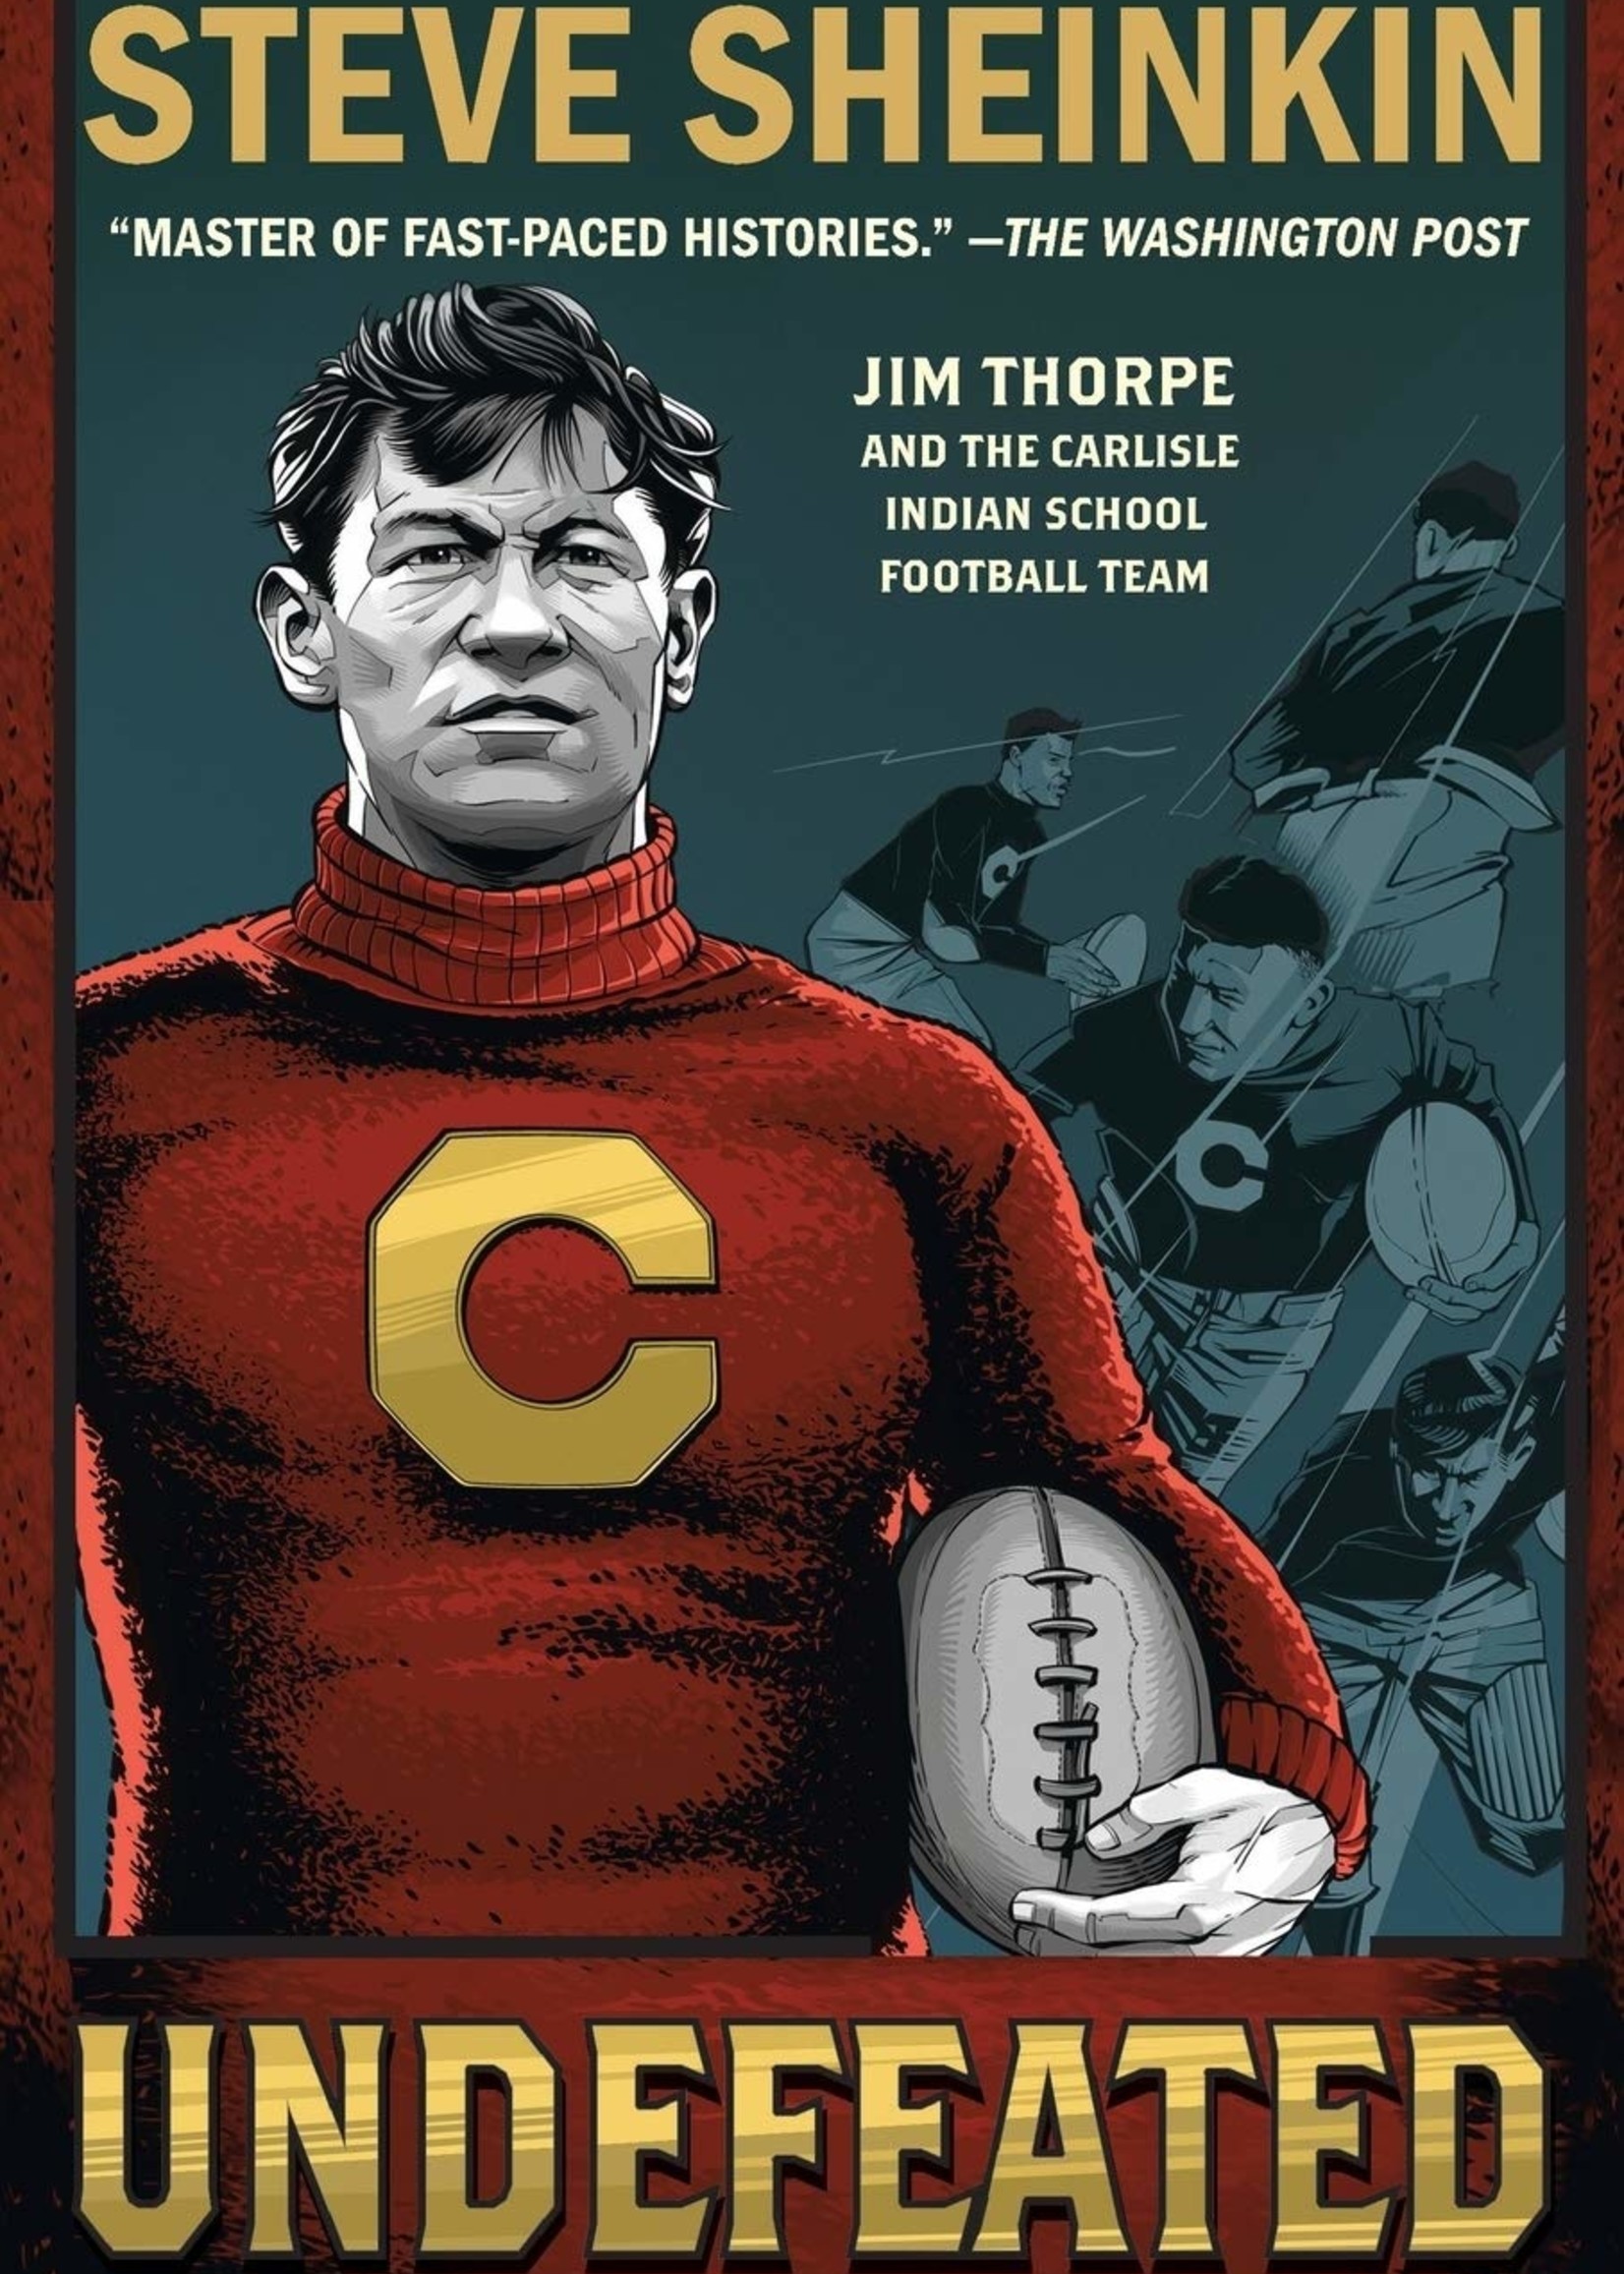 Undefeated: Jim Thorpe and the Carlisle Indian School Football Team - Paperback